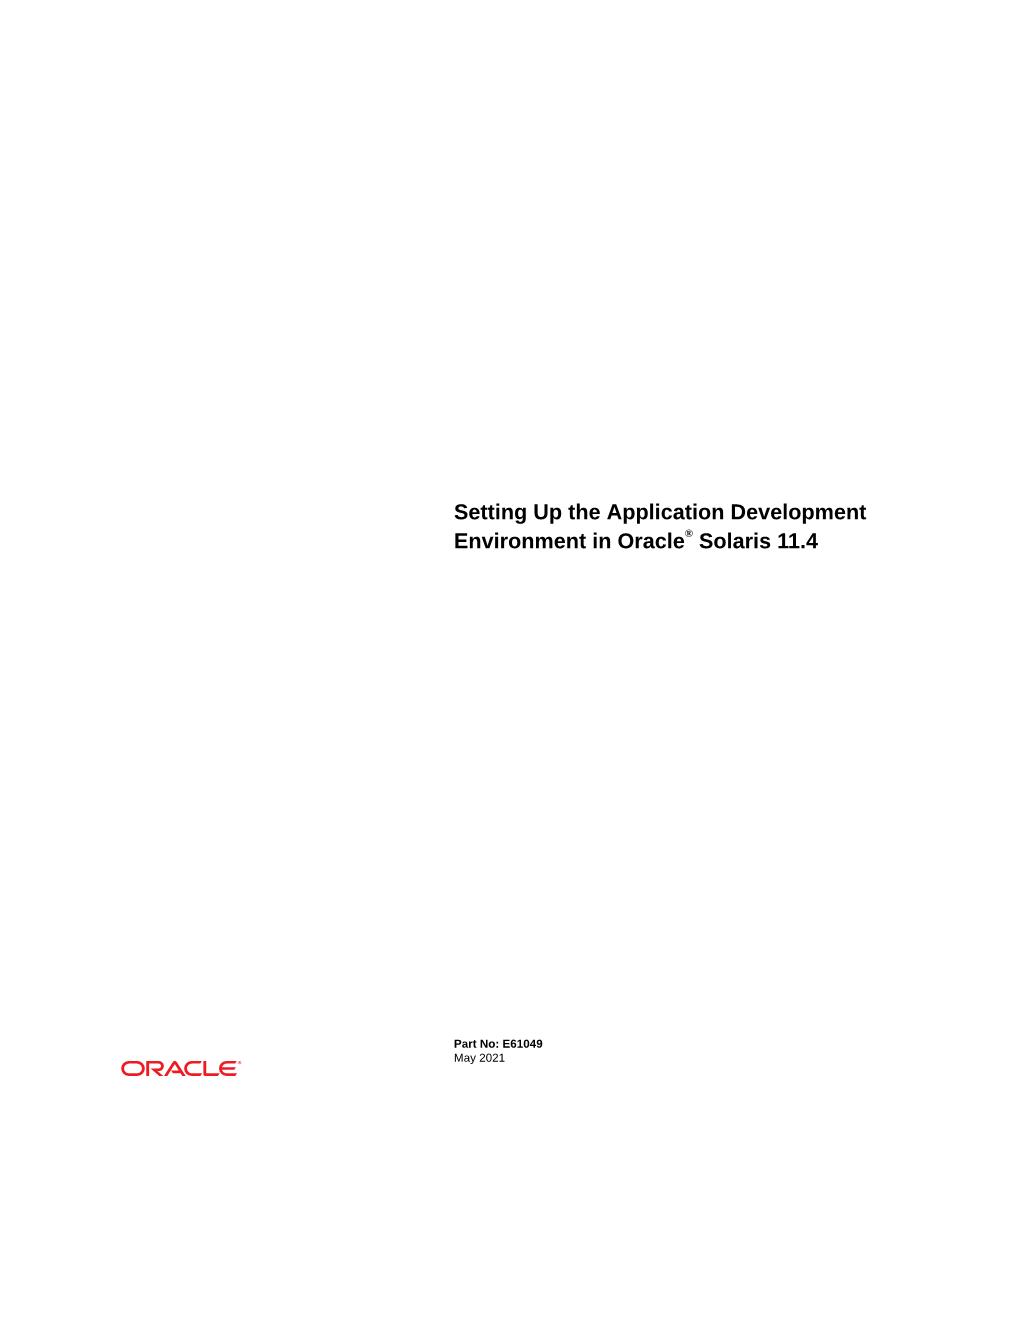 Setting up the Application Development Environment in Oracle Solaris 11.4 Part No: E61049 Copyright © 2010, 2021, Oracle And/Or Its Affiliates